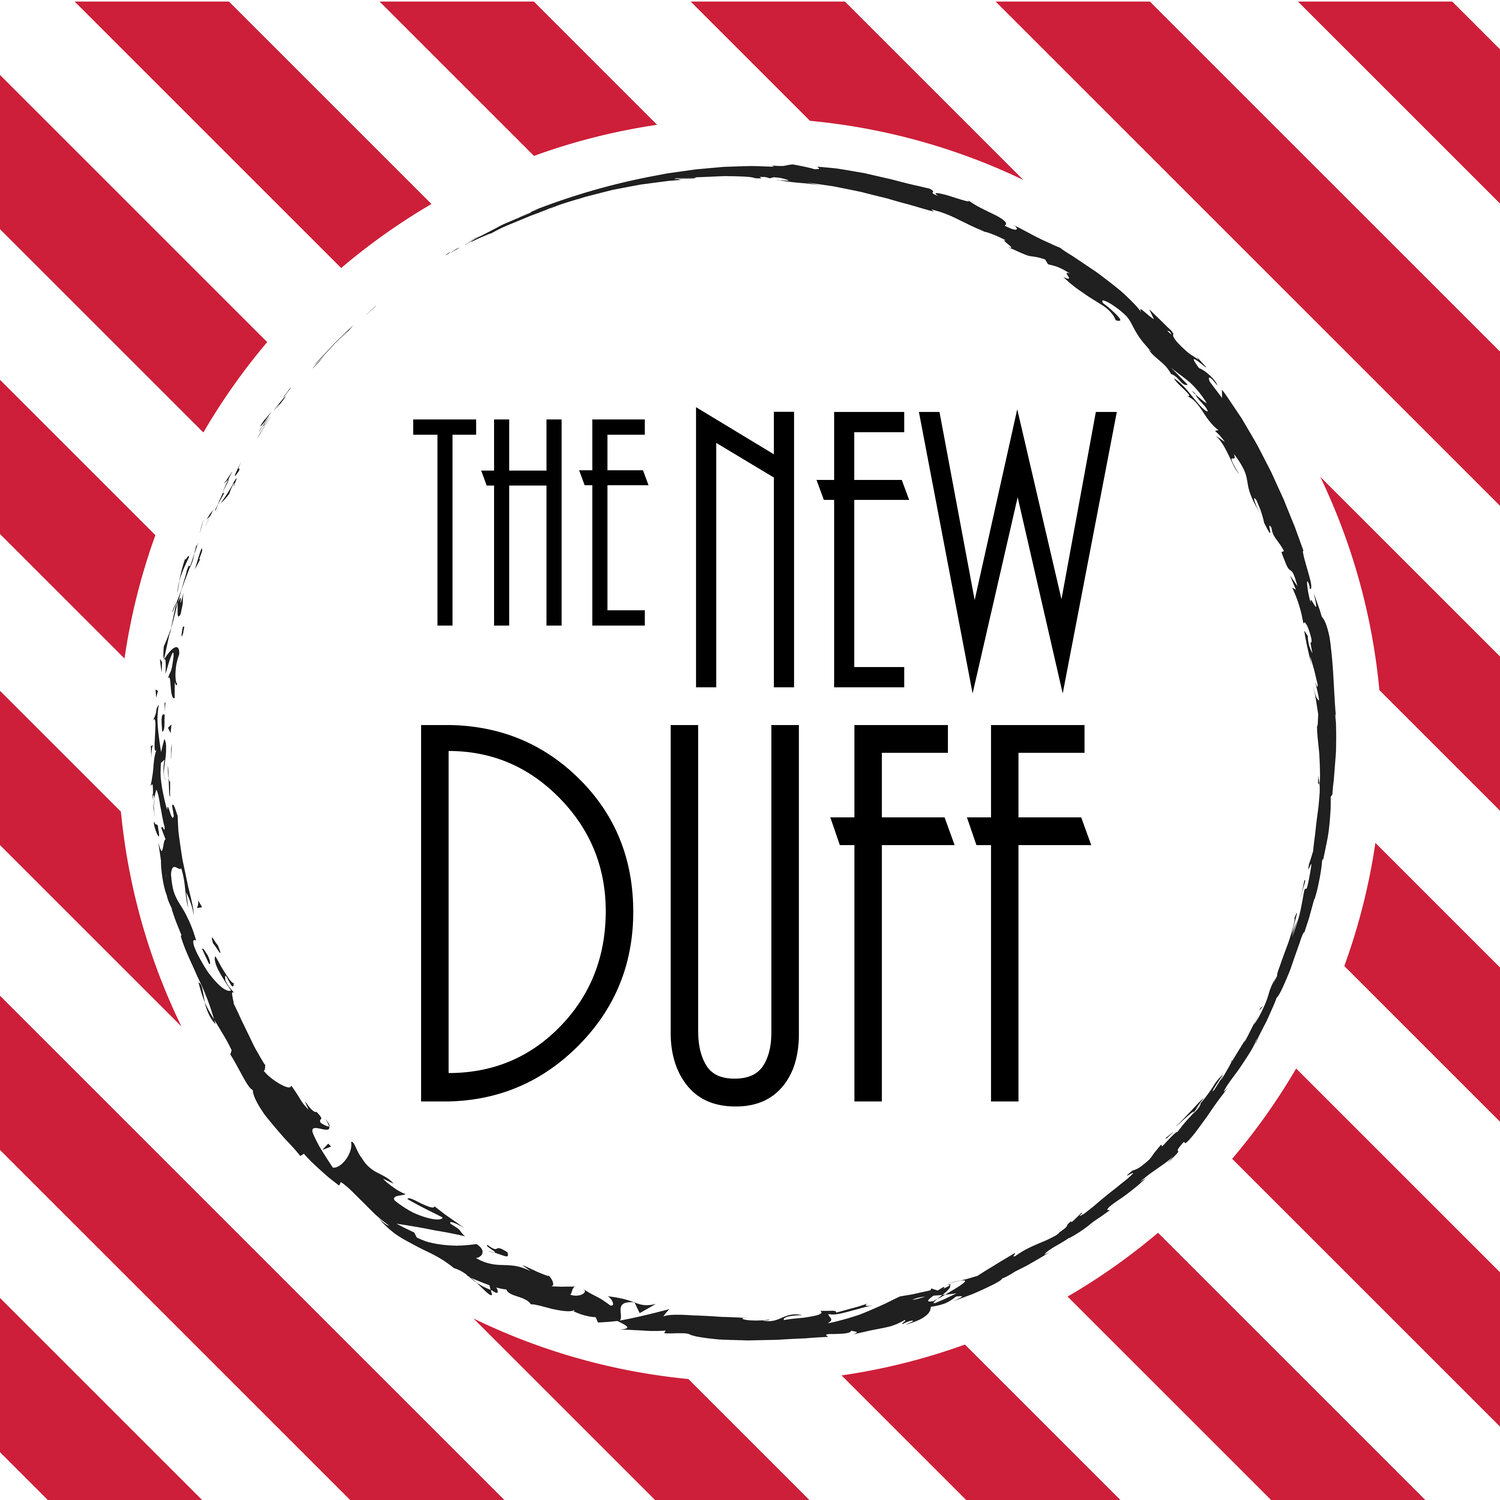 THE NEW DUFF